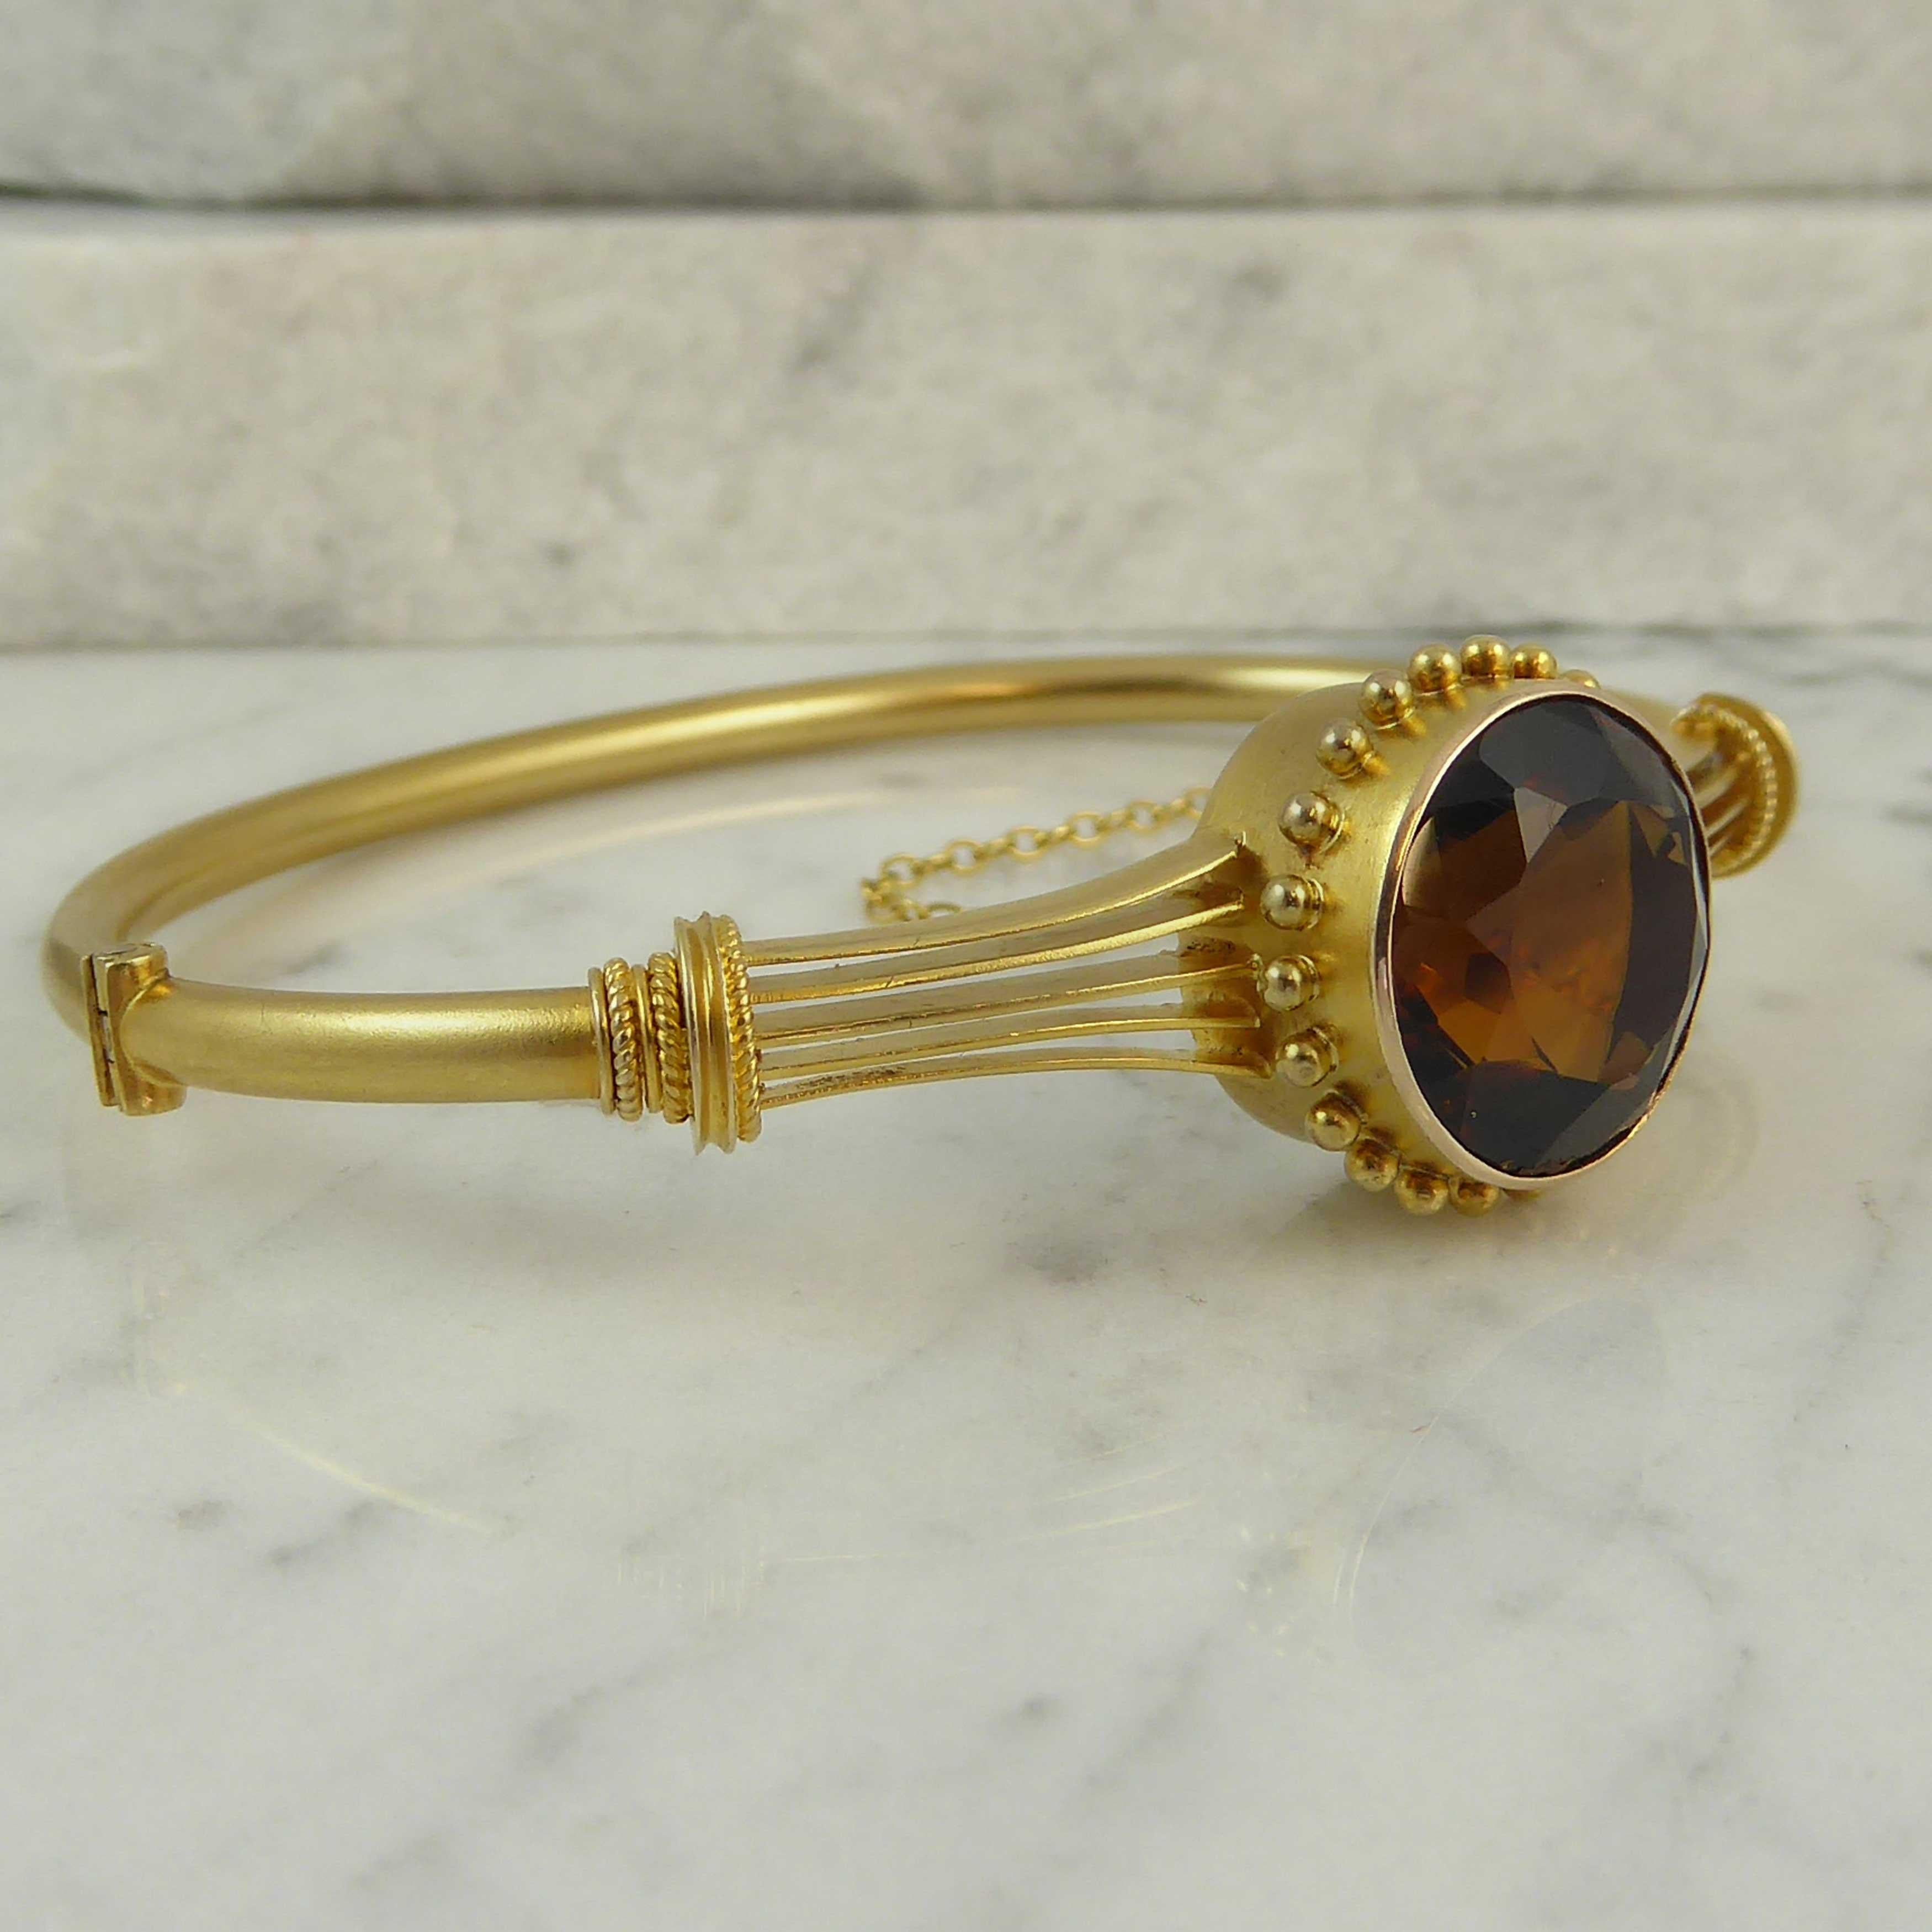 Dating from the latter part of the Victorian era this beautiful bangle is wrought in 15ct gold and displays classical elements typical of the era.  The bangle is set with a dark amber toned Cairngorm Quartz in a collet setting 0.32 inch deep and